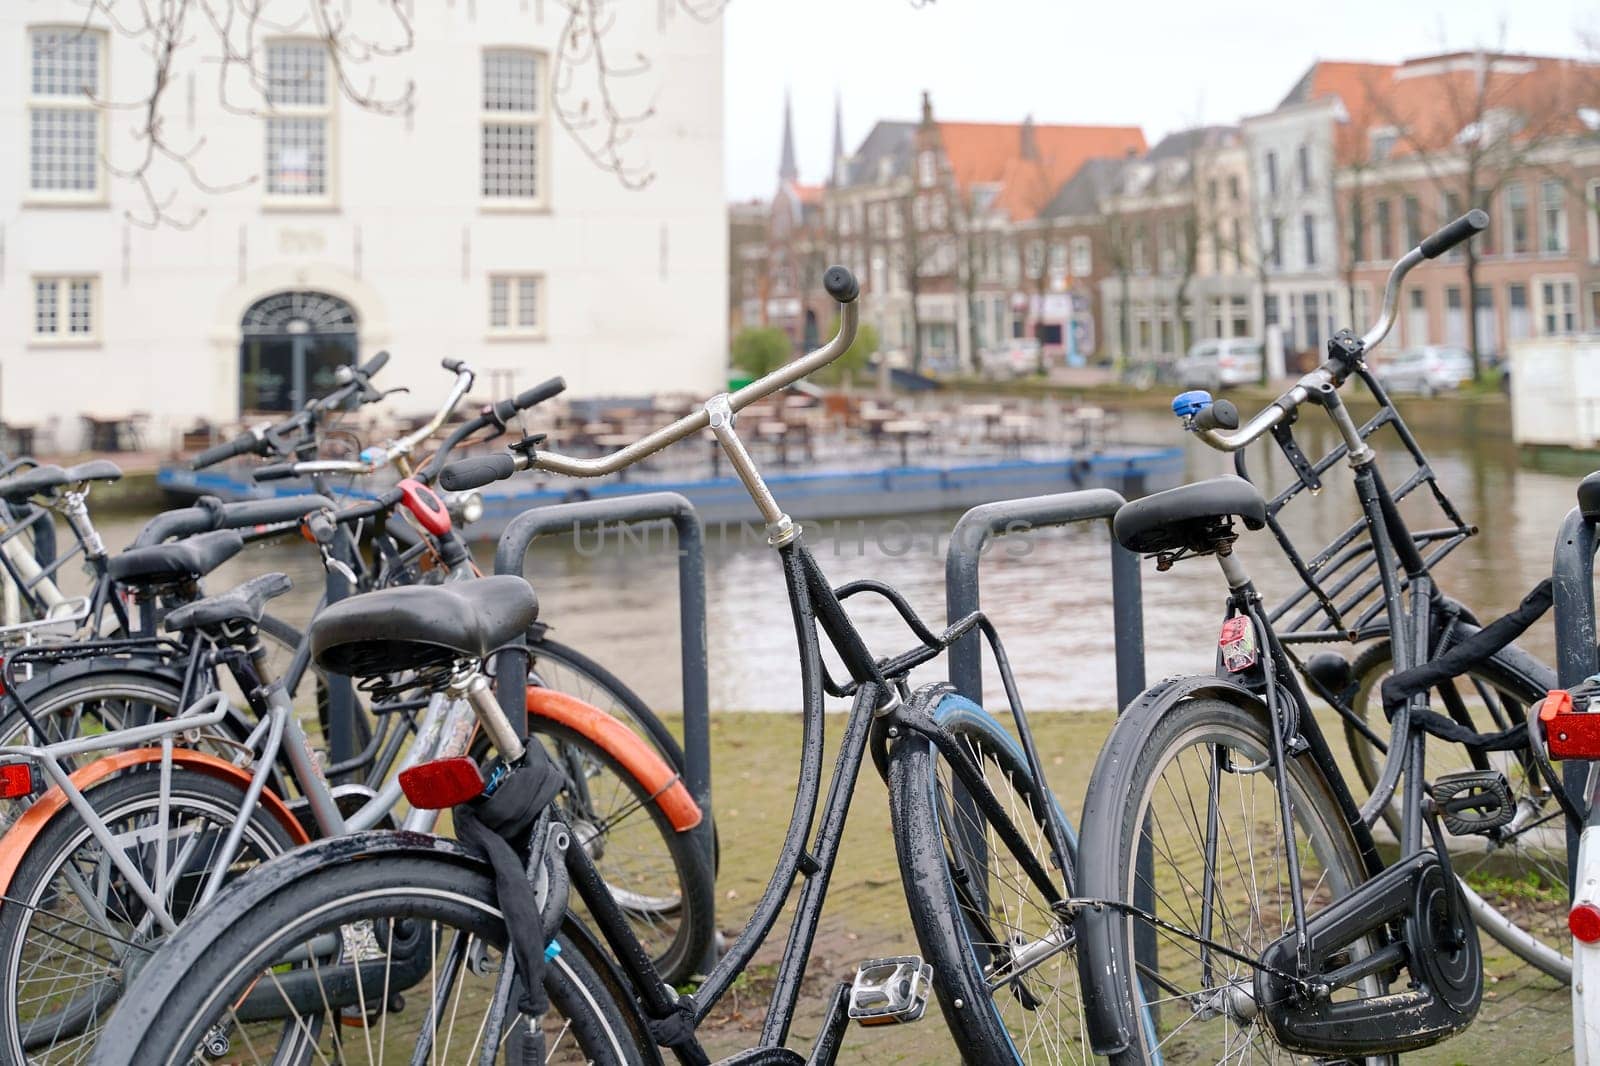 Delft, Netherlands. Bicycles parked alongside a channel on beautiful old buildings background. by berezko